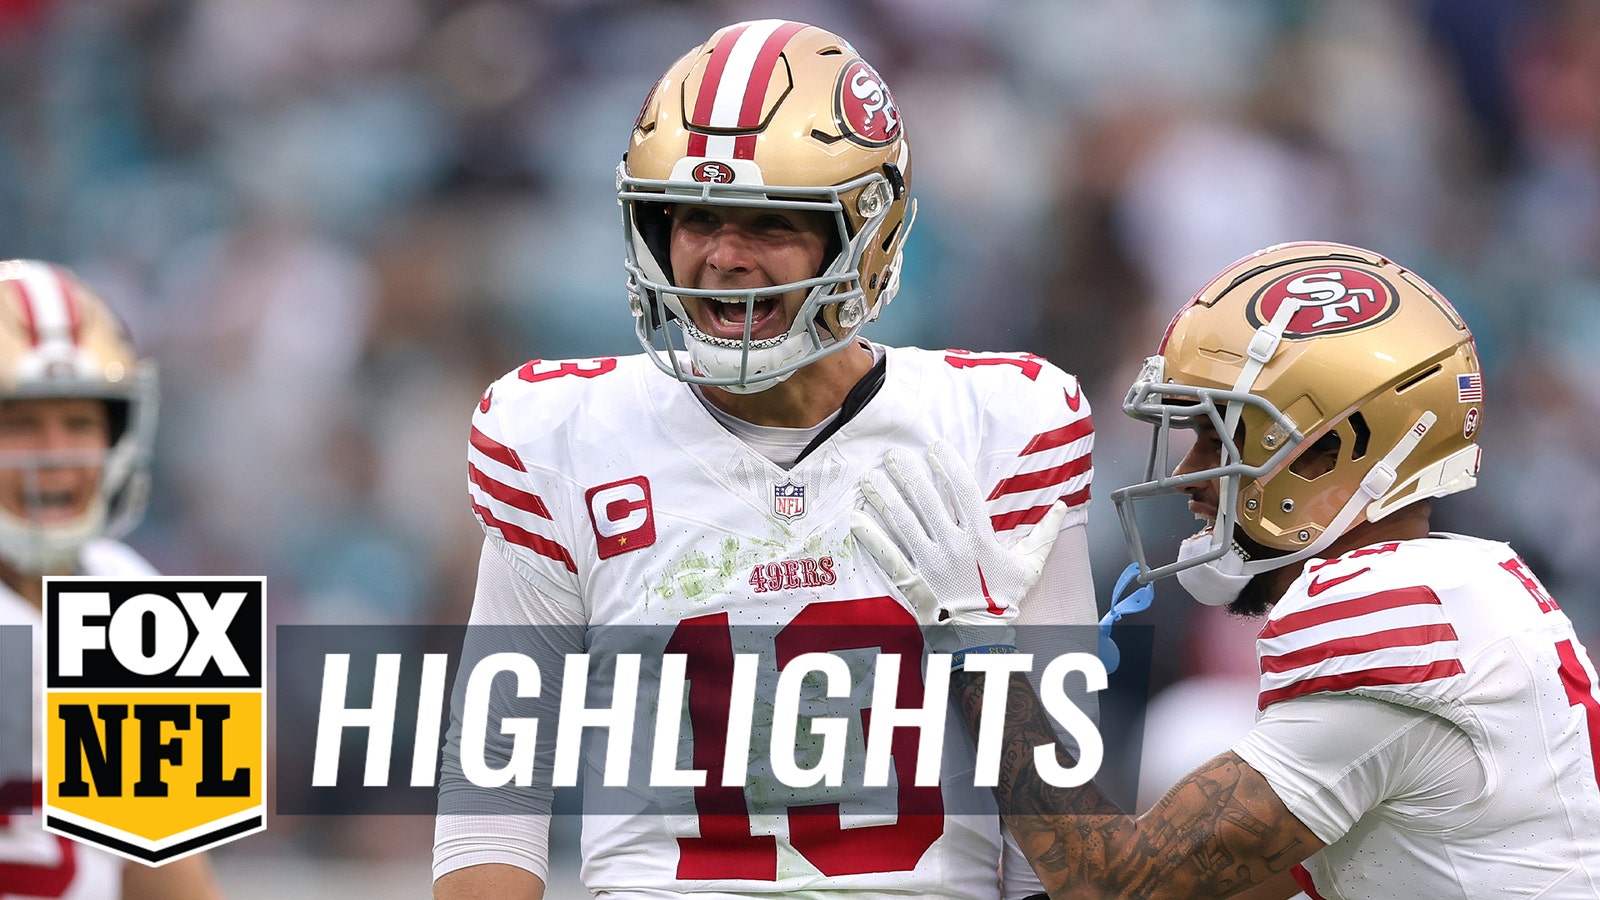 Brock Purdy throws for 296 yards and three TDs as 49ers rout Jaguars